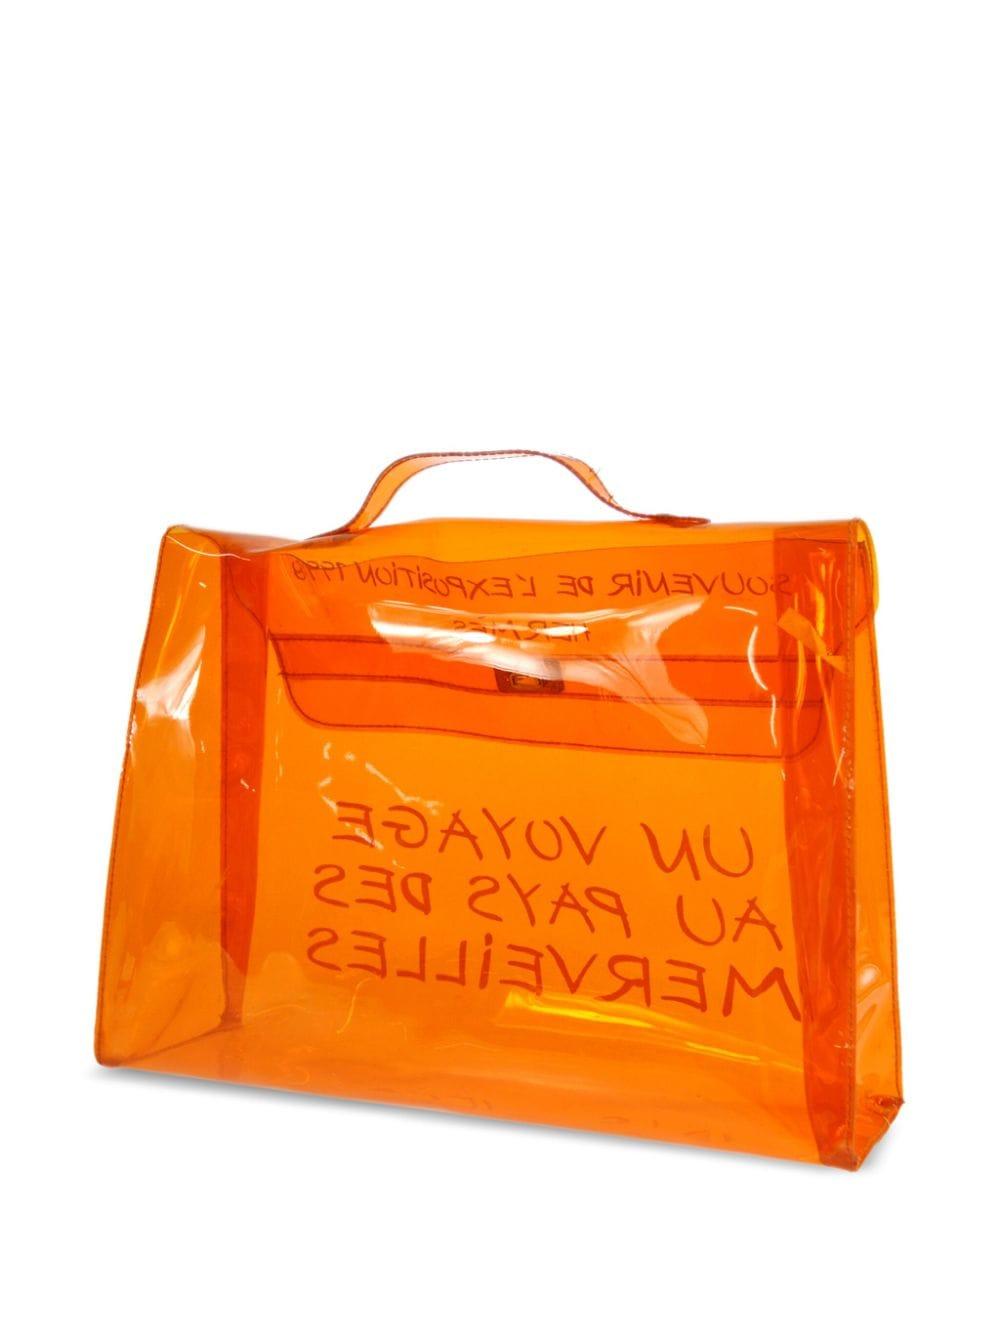 Hermes 1998 orange vinyl Kelly 40 beach bag featuring Transparent Plastic Bag-Shaped Kelly, hardware in gilt silver tone metal, a slogan print to the front, a flip-lock fastening, a simple handle in transparent vinyl allowing the bag to be worn in